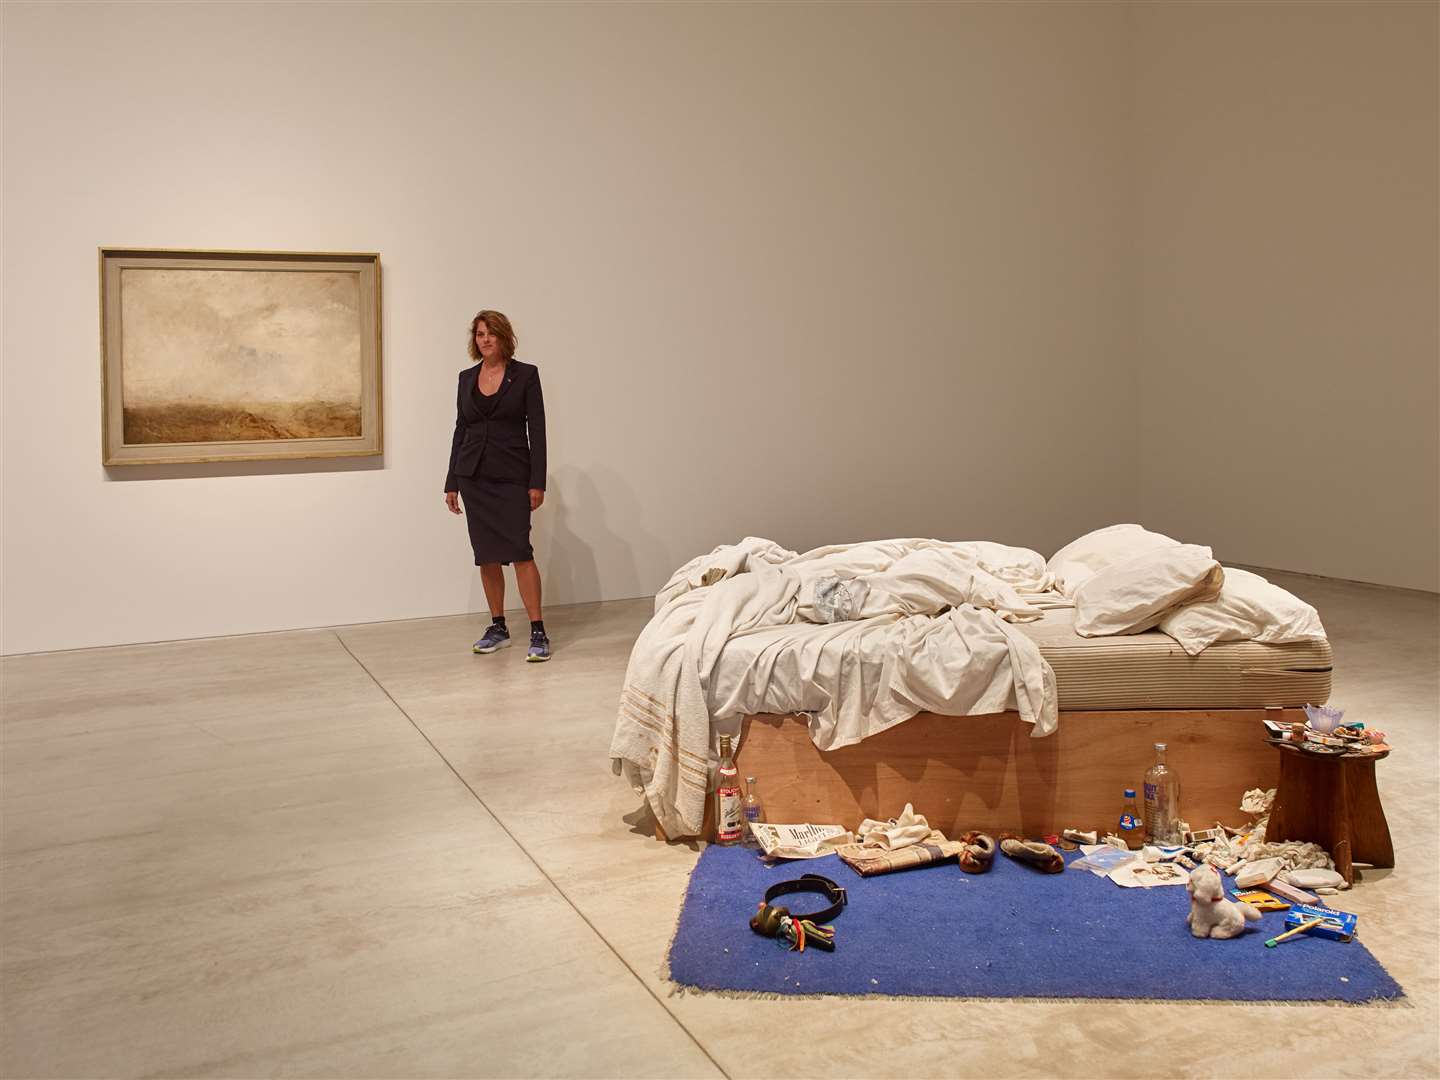 Tracey Emin and her My Bed when it went on display at the Turner Contemporary in her home town of Margate in 2017